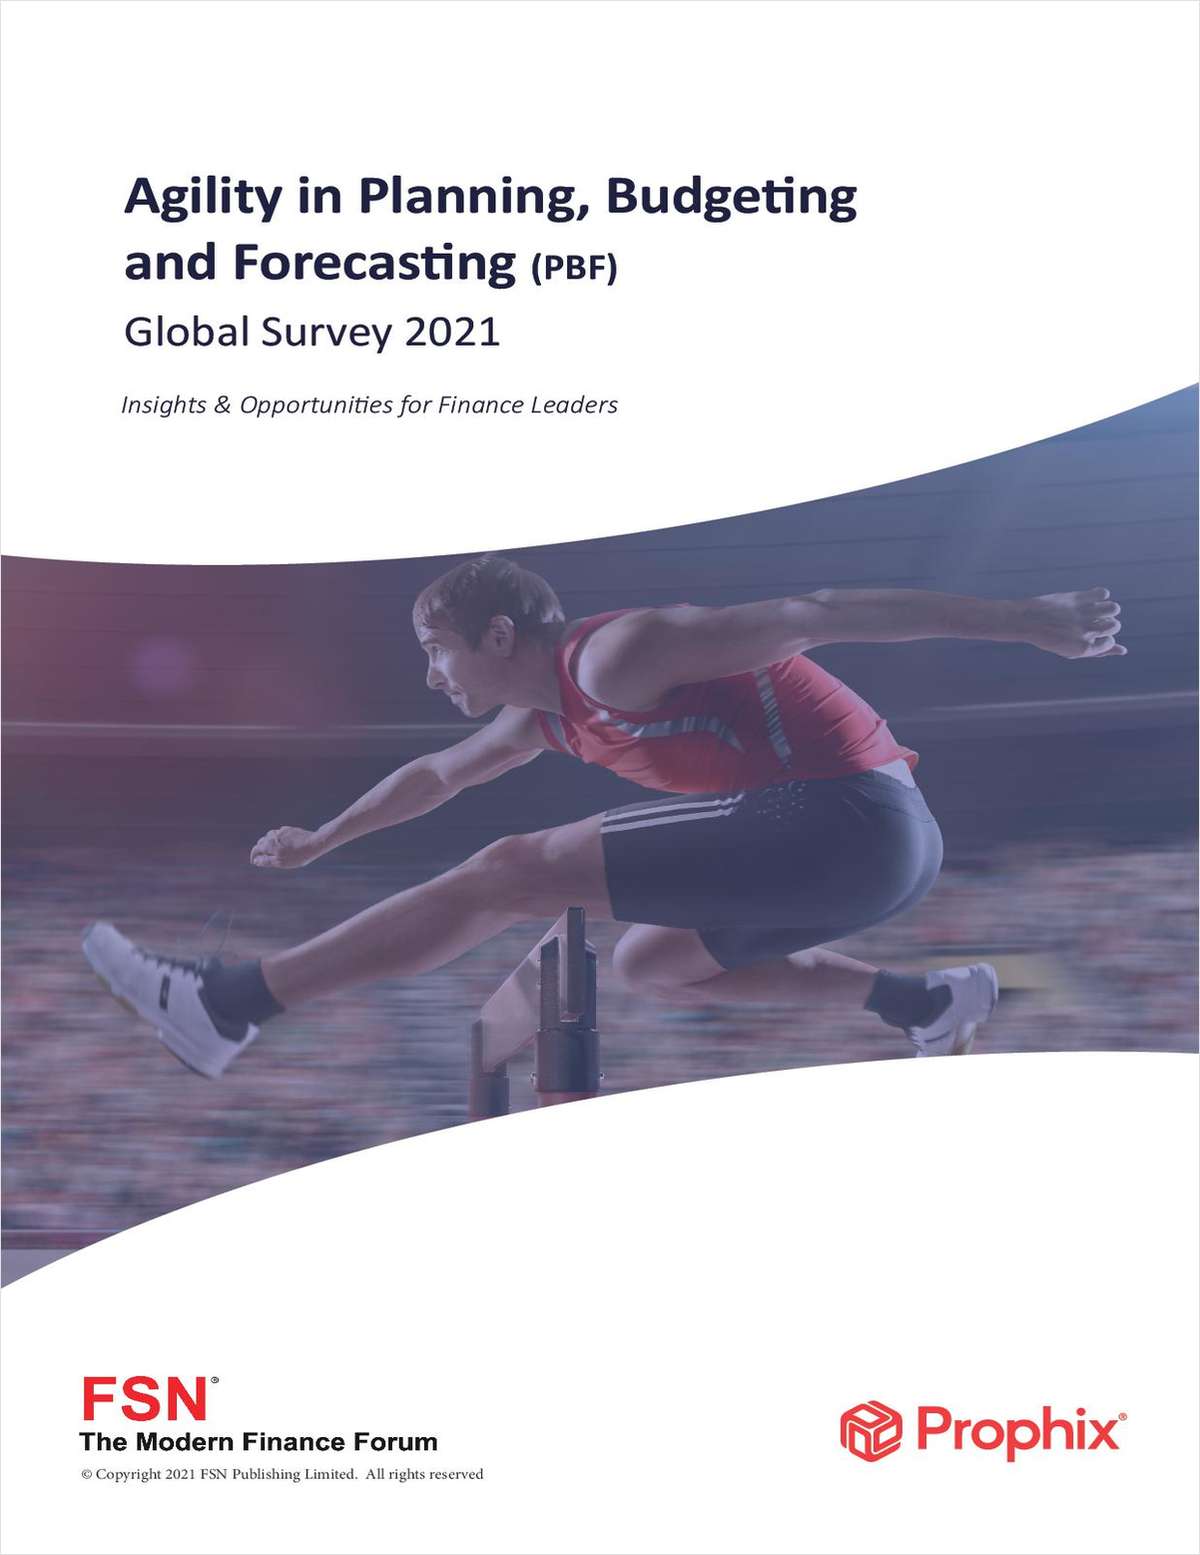 FSN Global Survey 2021: Agility In Planning, Budgeting And Forecasting